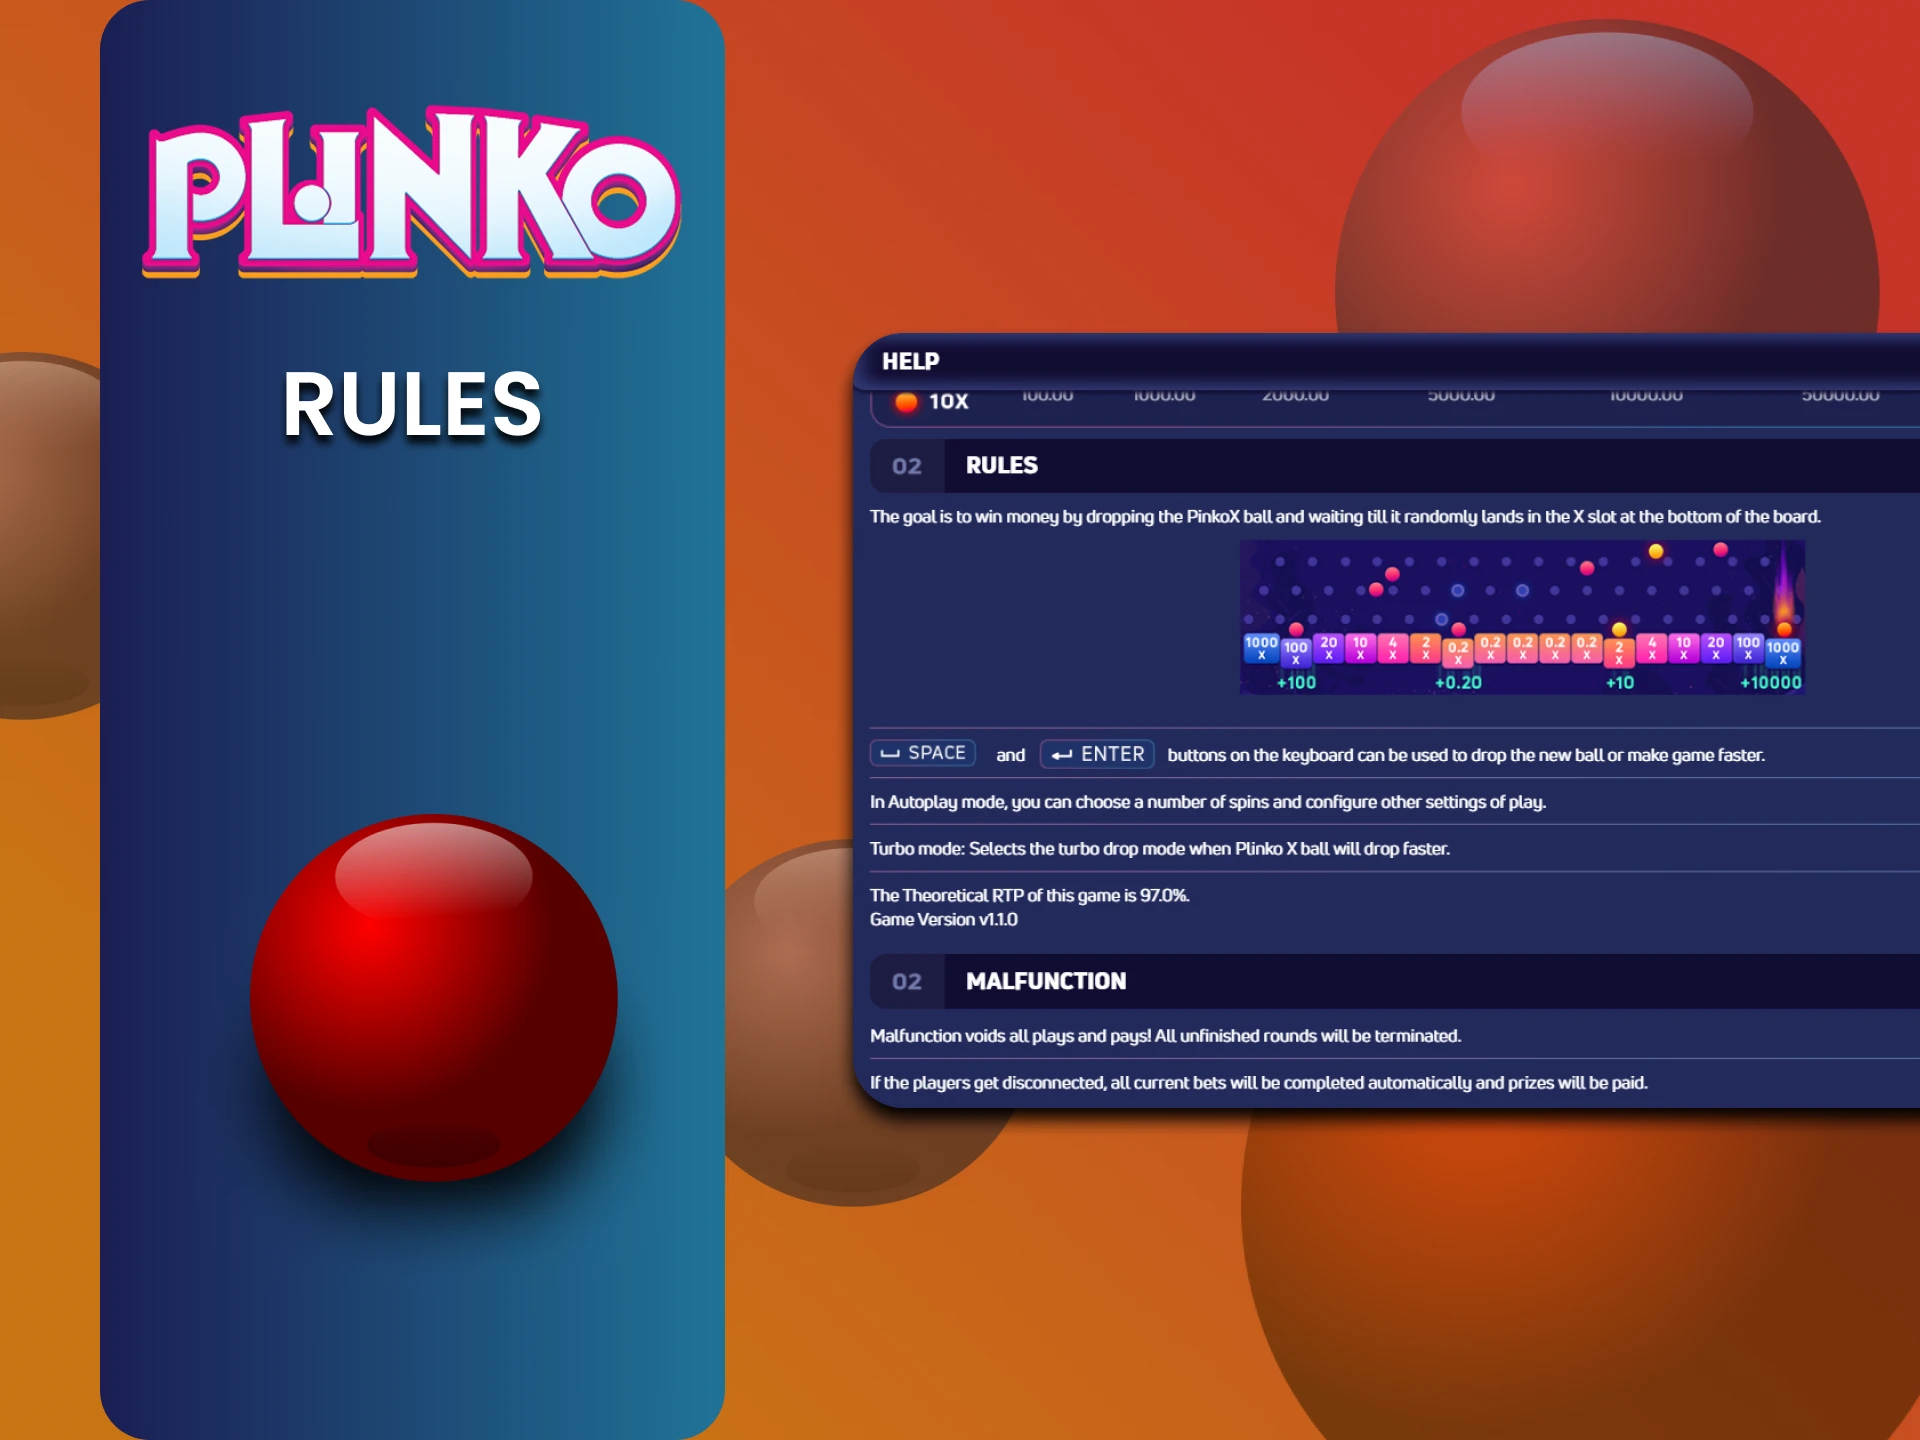 Learn the rules of the game in Plinko.